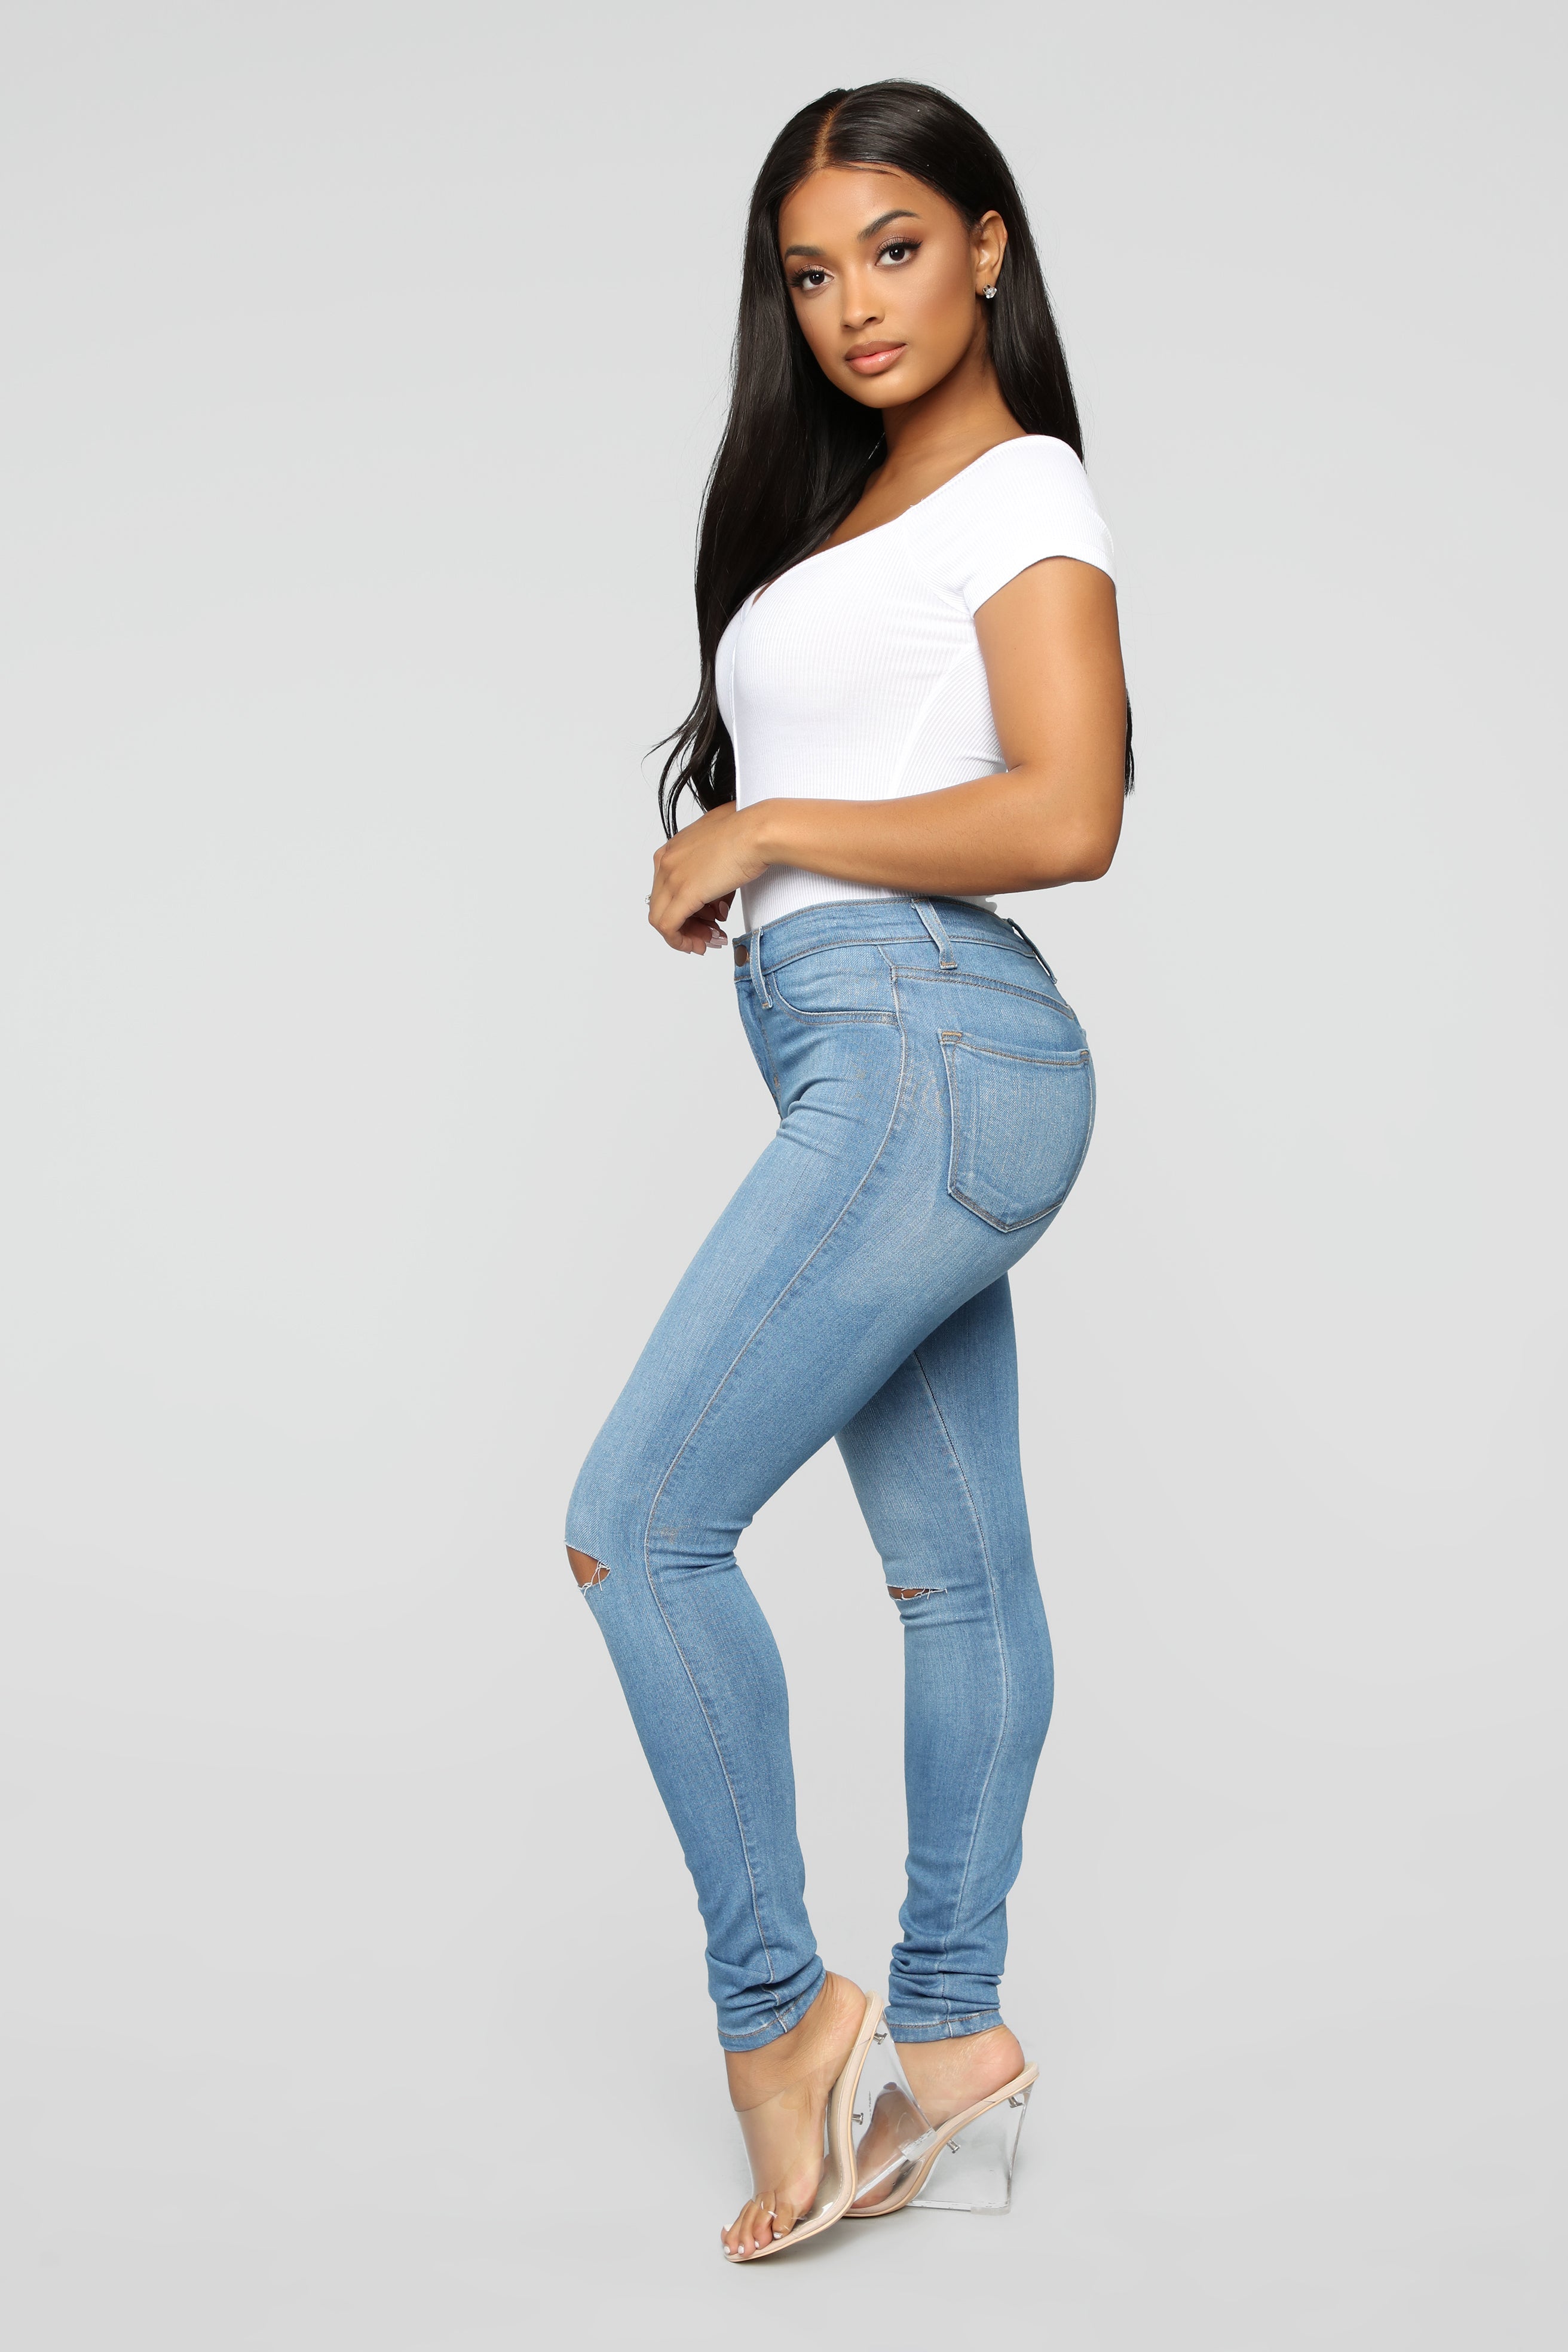 Canopy Jeans - Light Blue Wash Ins Street